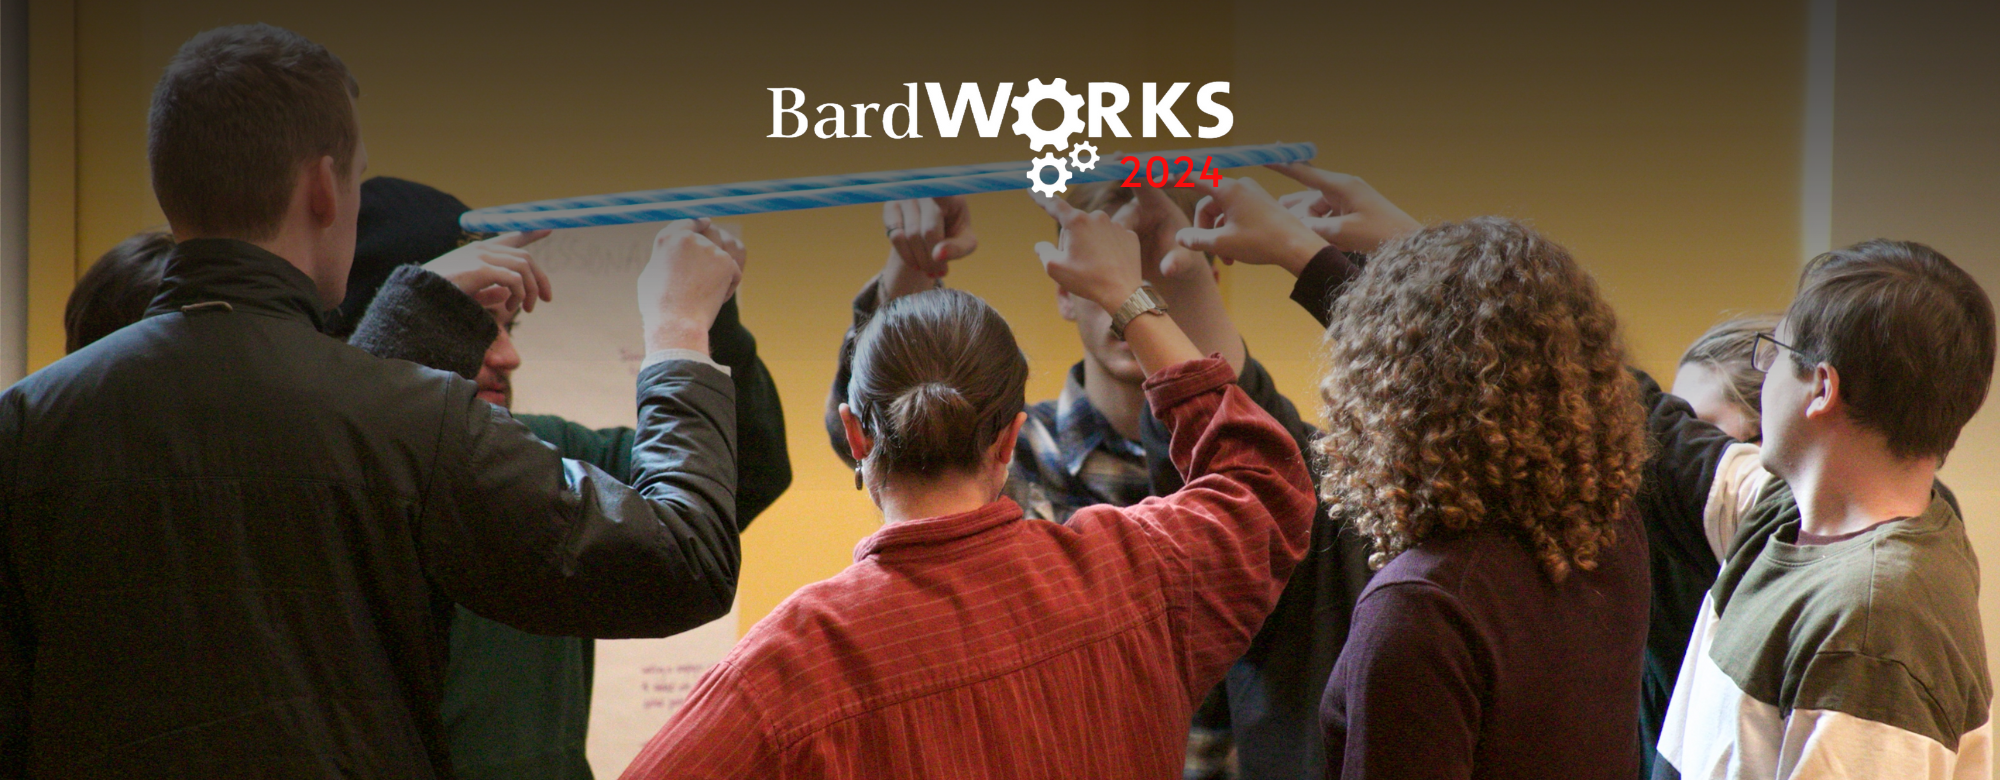 Main Image for About BardWorks